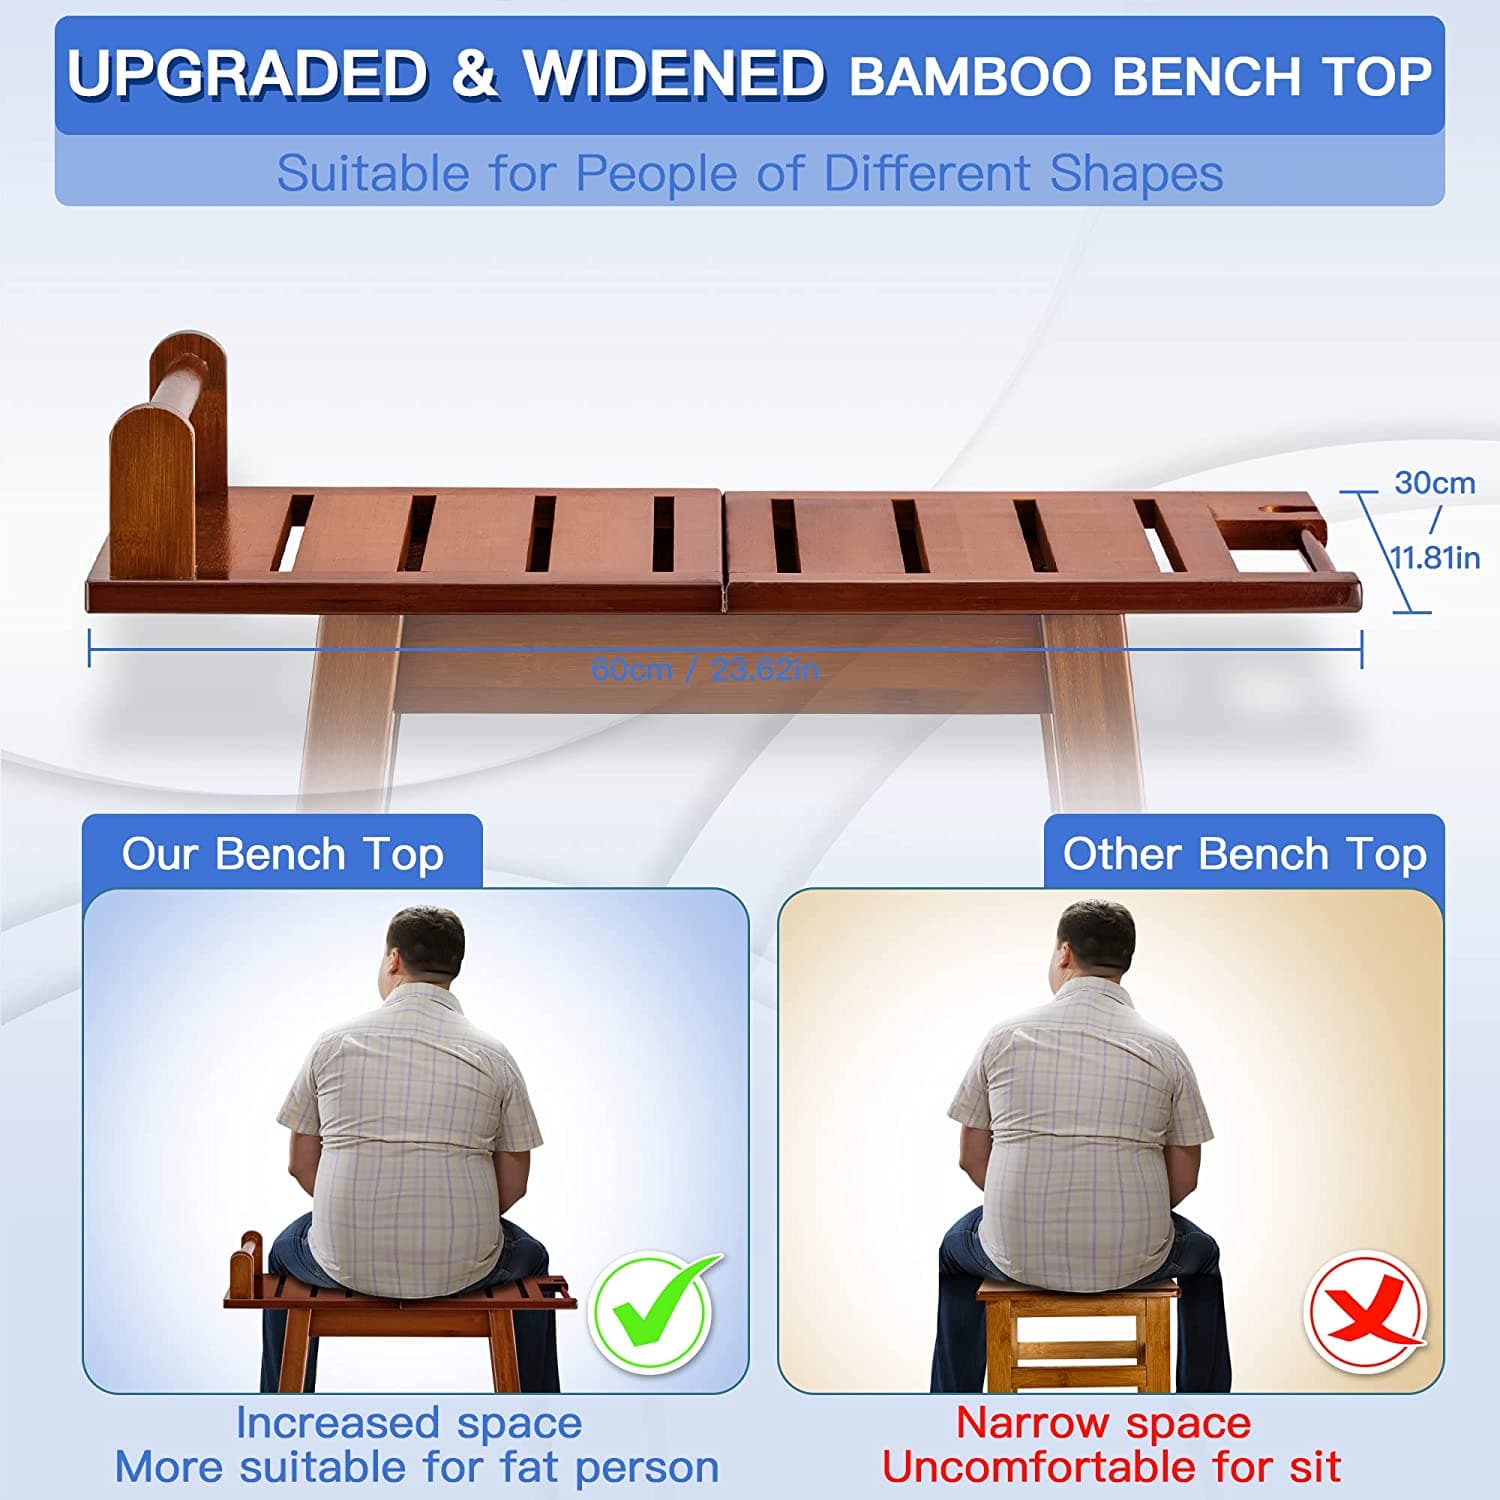 Etechmart 24 Inch A-Shaped Bamboo Shower Bench,Newly Upgraded & WidenedI with 2-Tier Storage Shelf and Handle